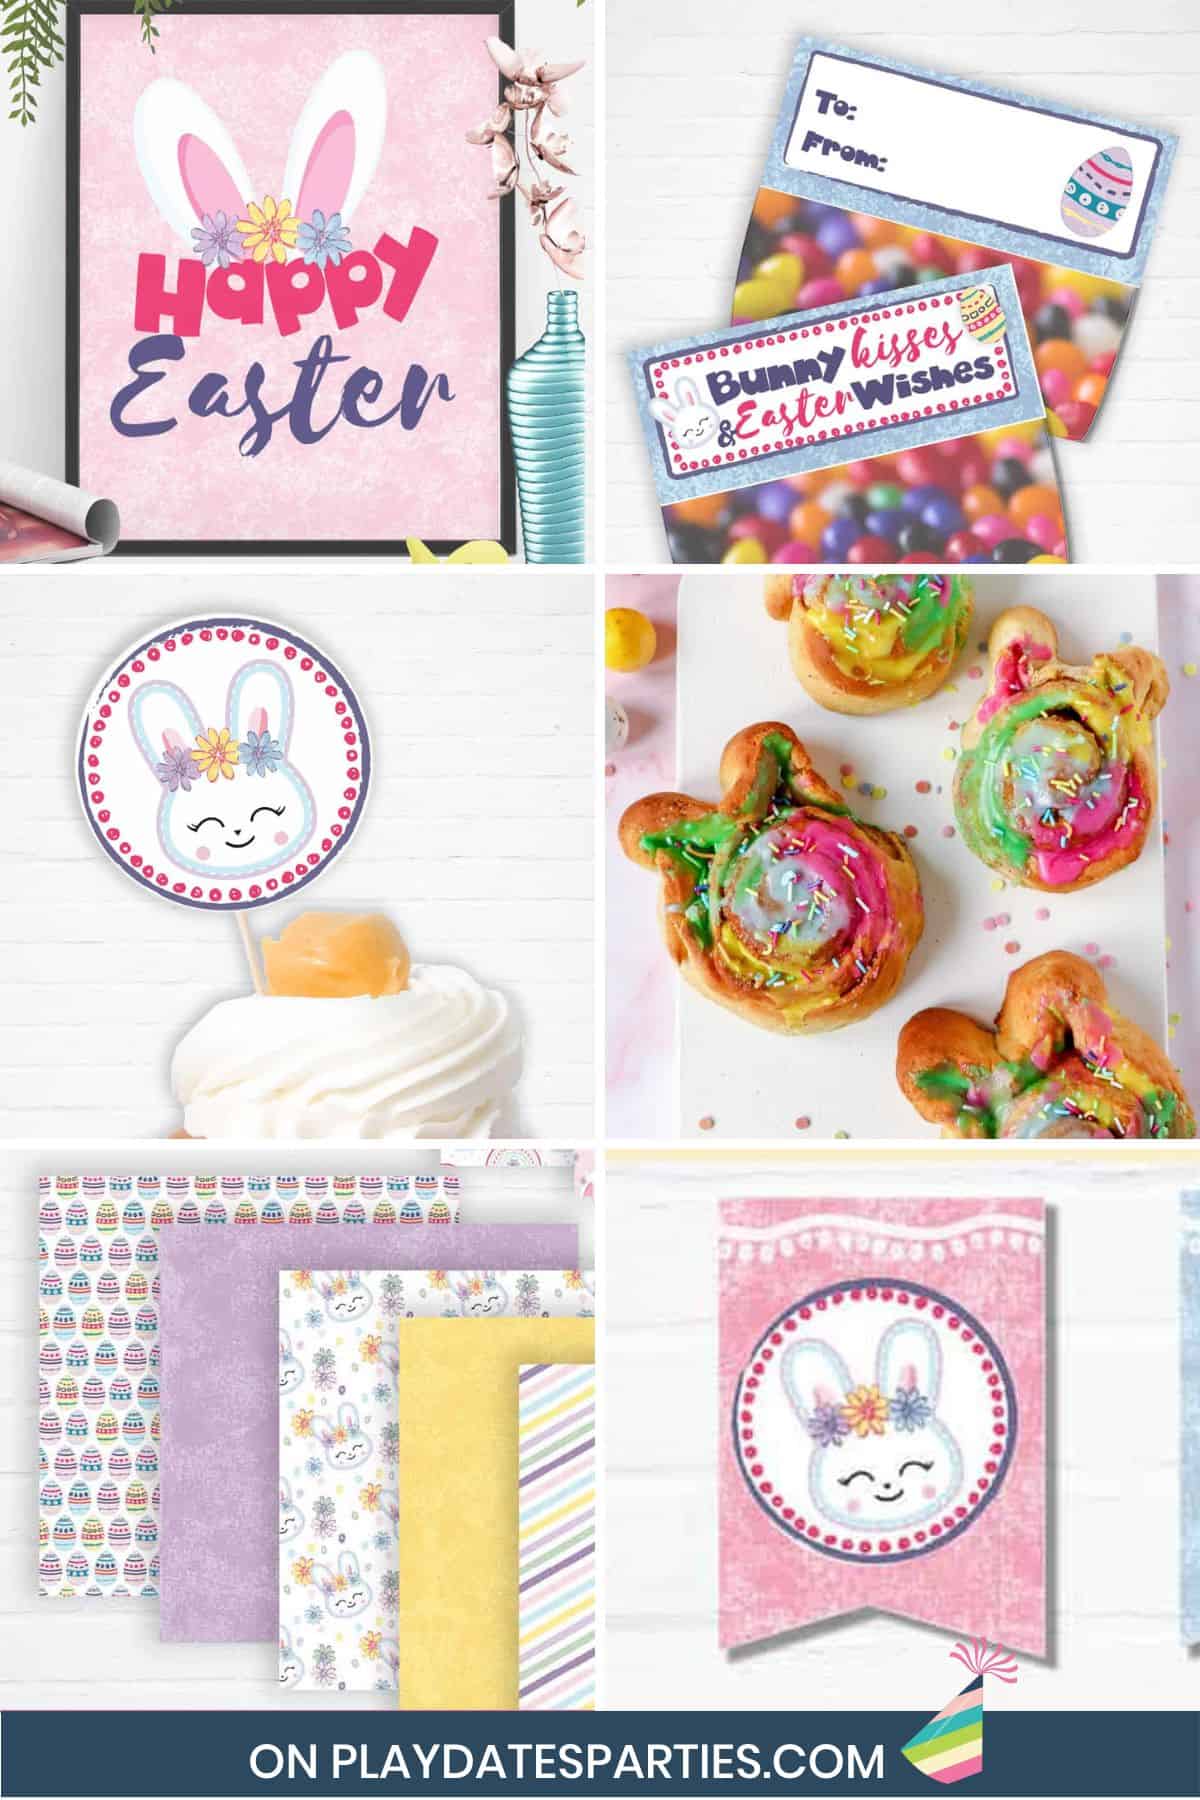 Collage of bunny party ideas, including printables, favors, signs, and food.